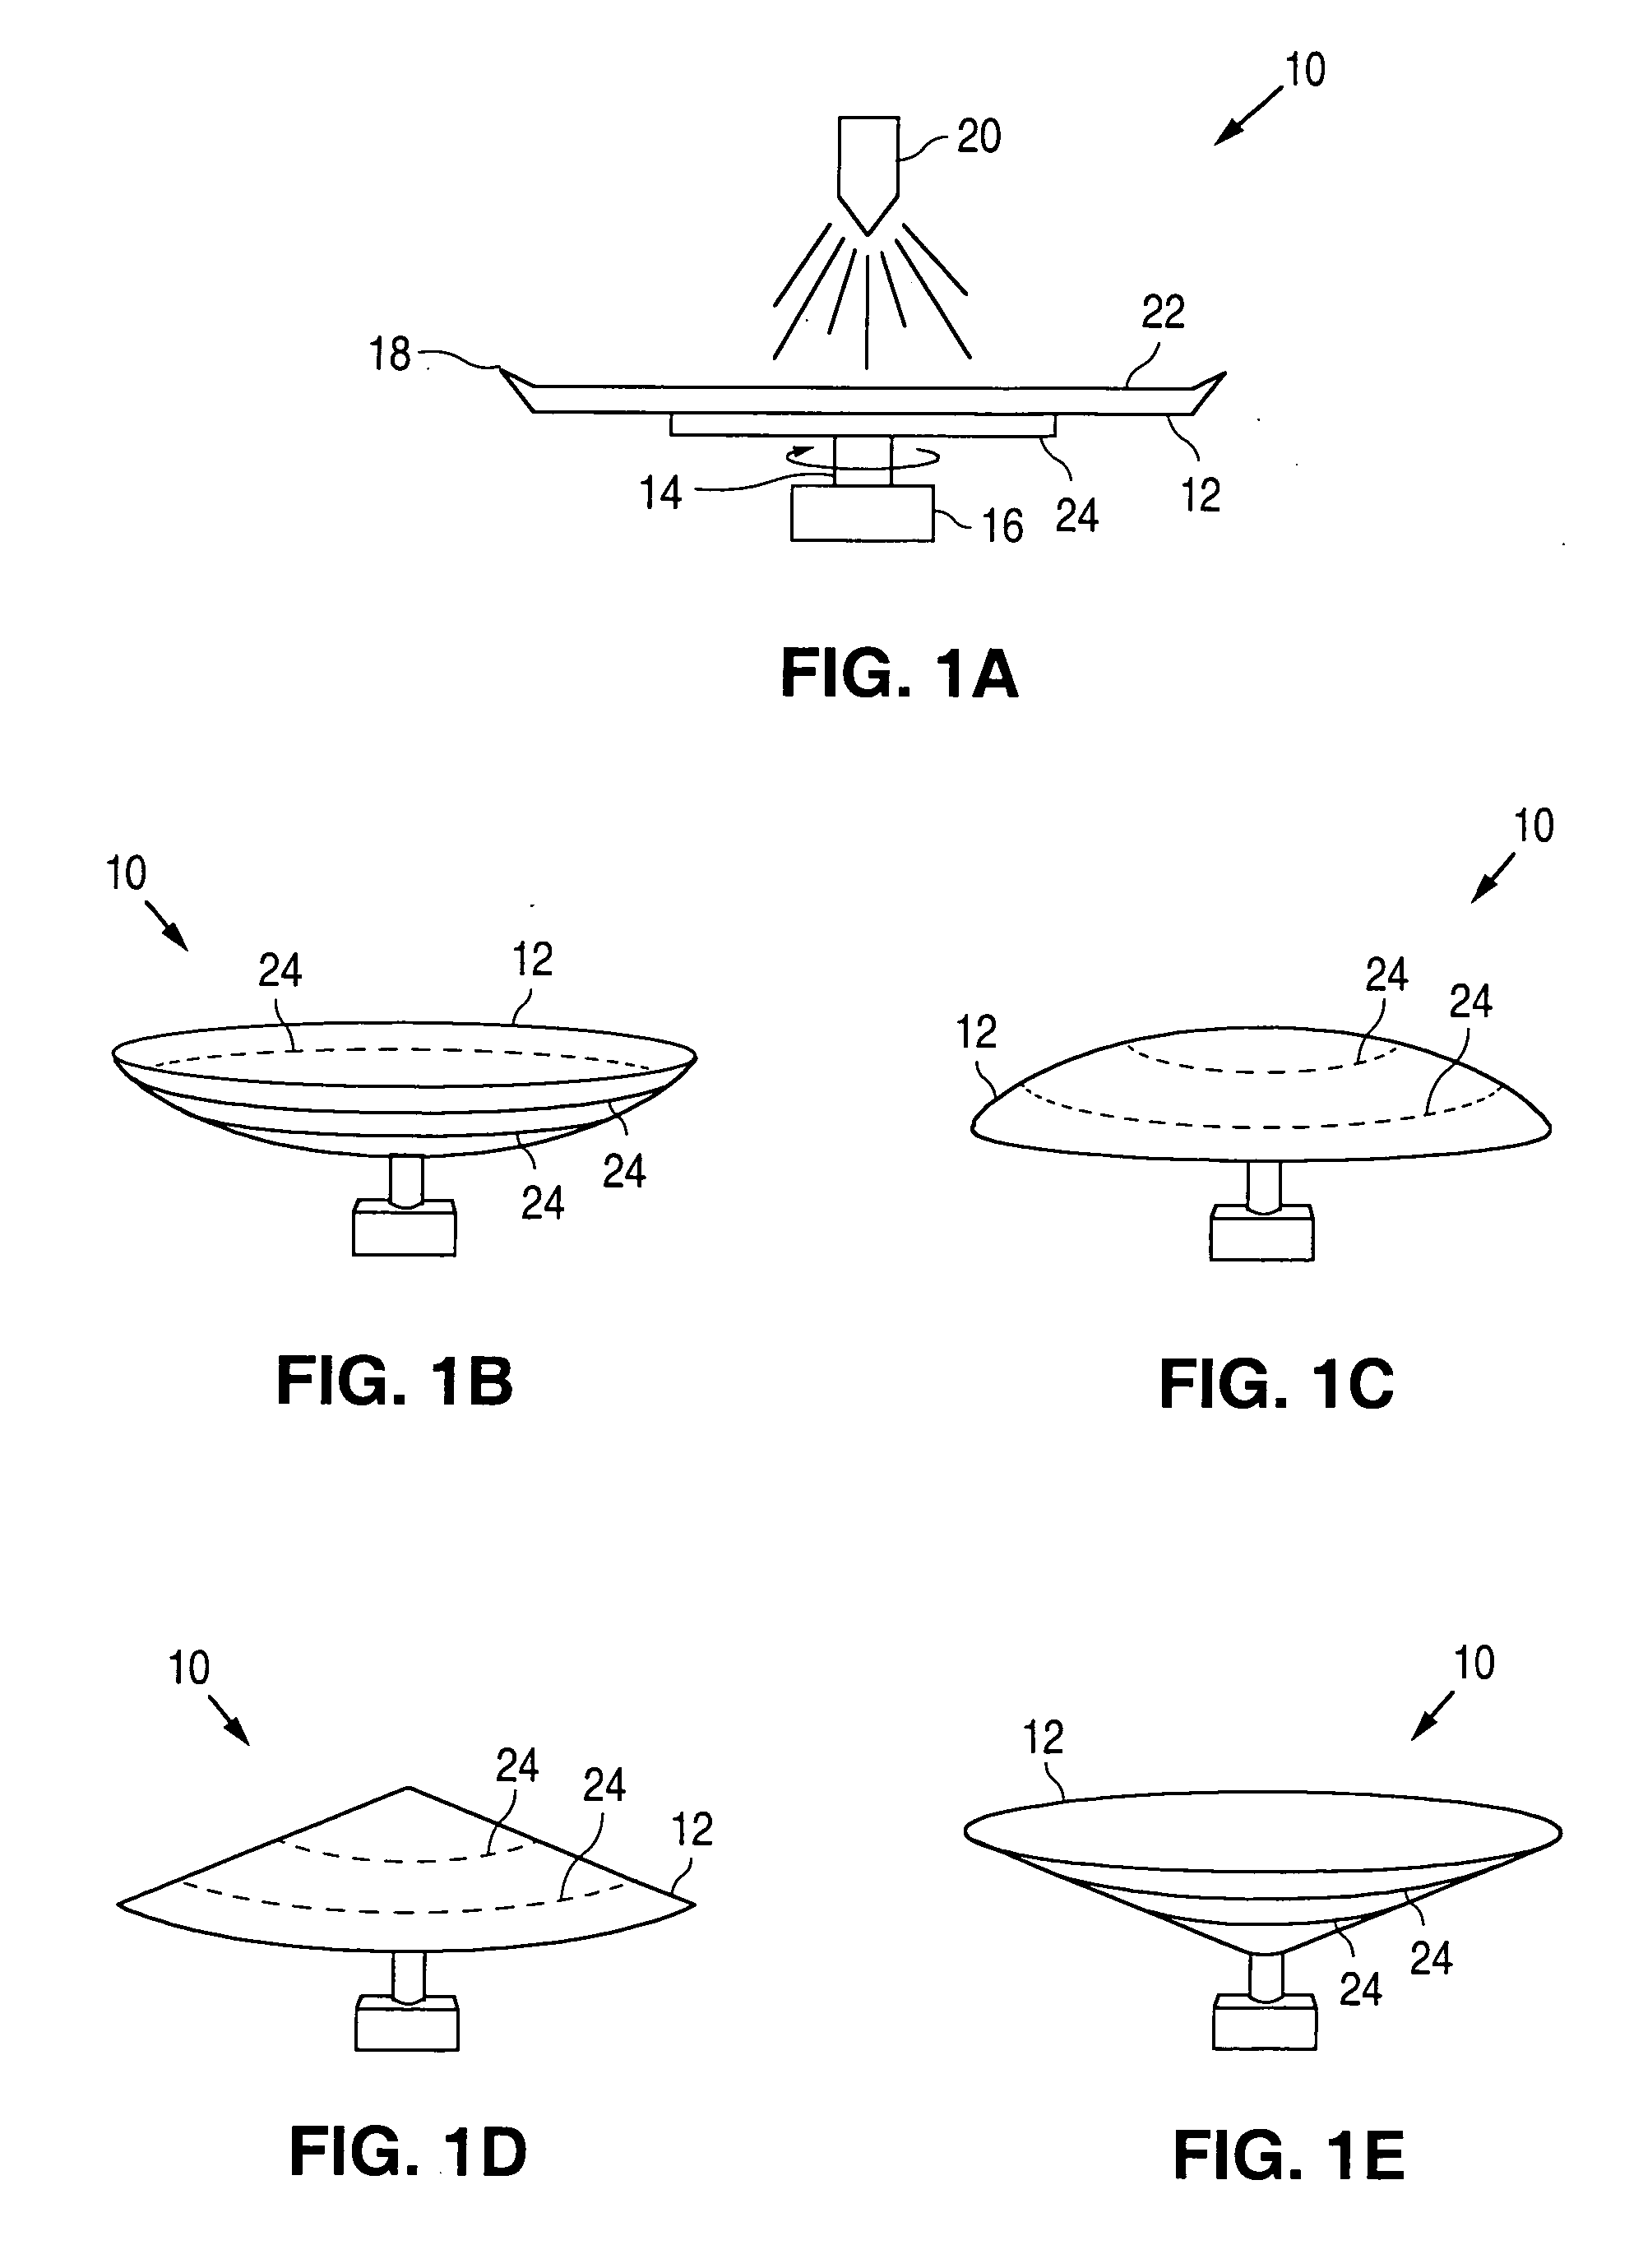 Method of coating implantable medical devices